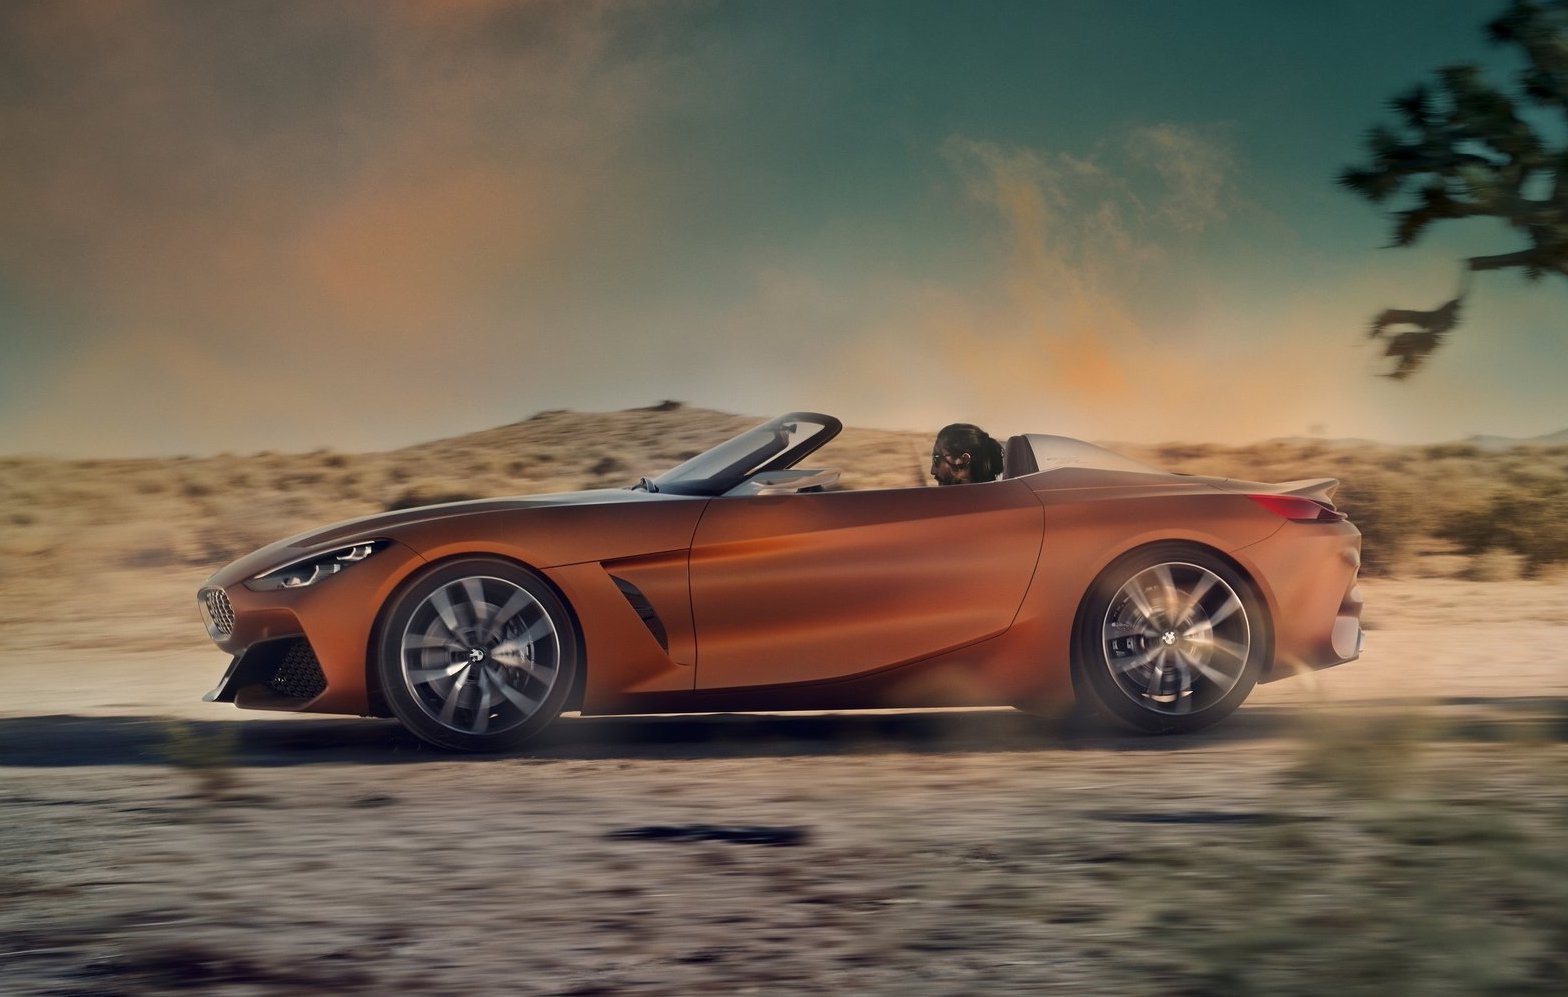 New BMW Z4 to debut at special event mid-year – report